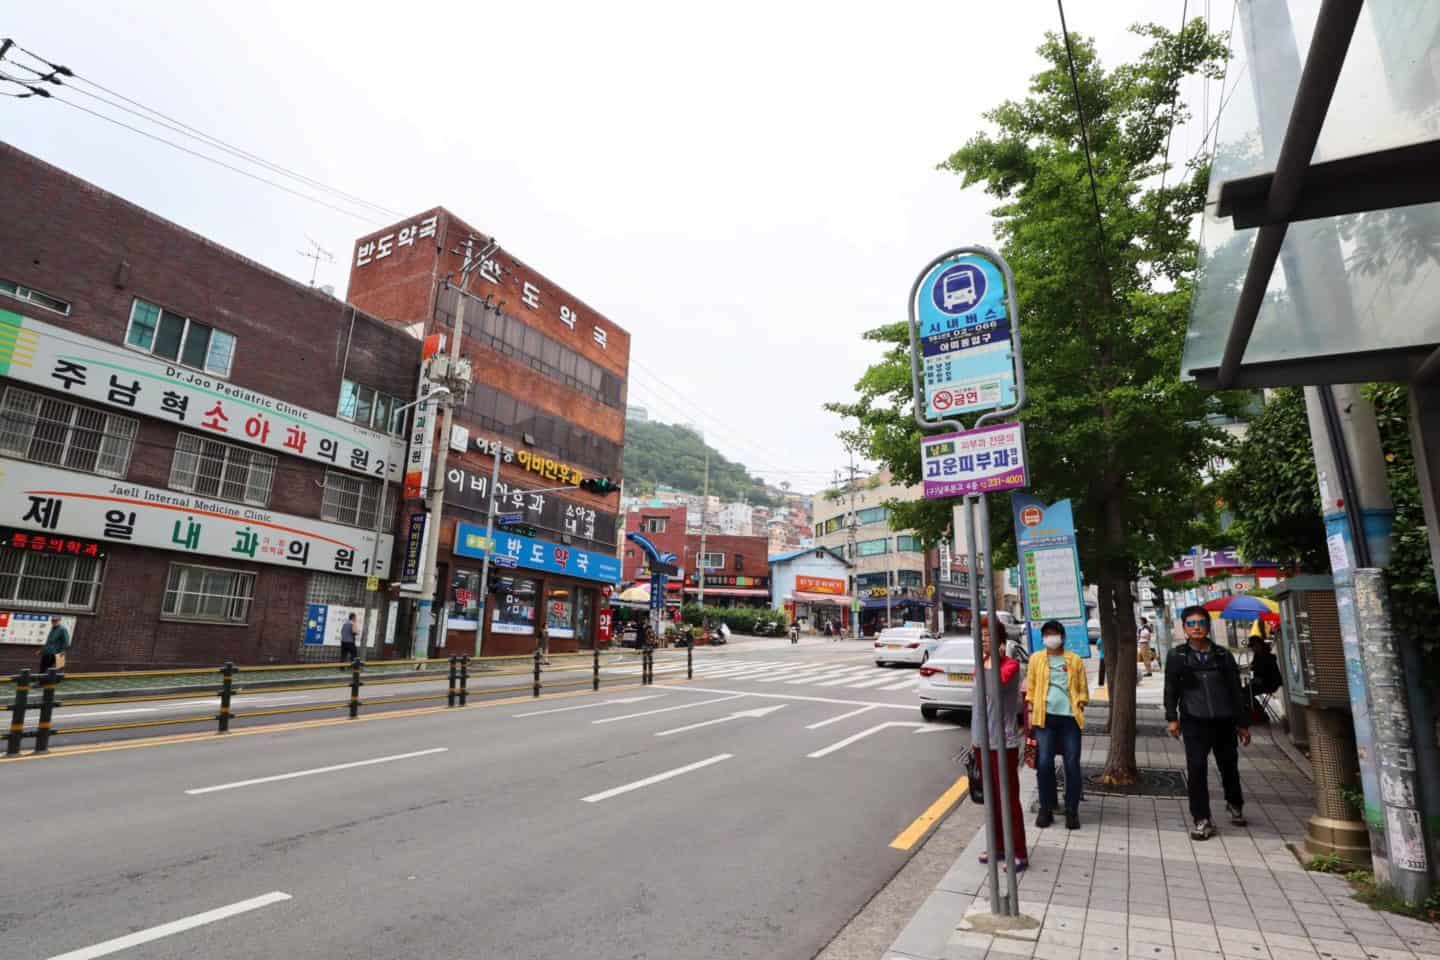 bus stop for Gamcheon Culture Village